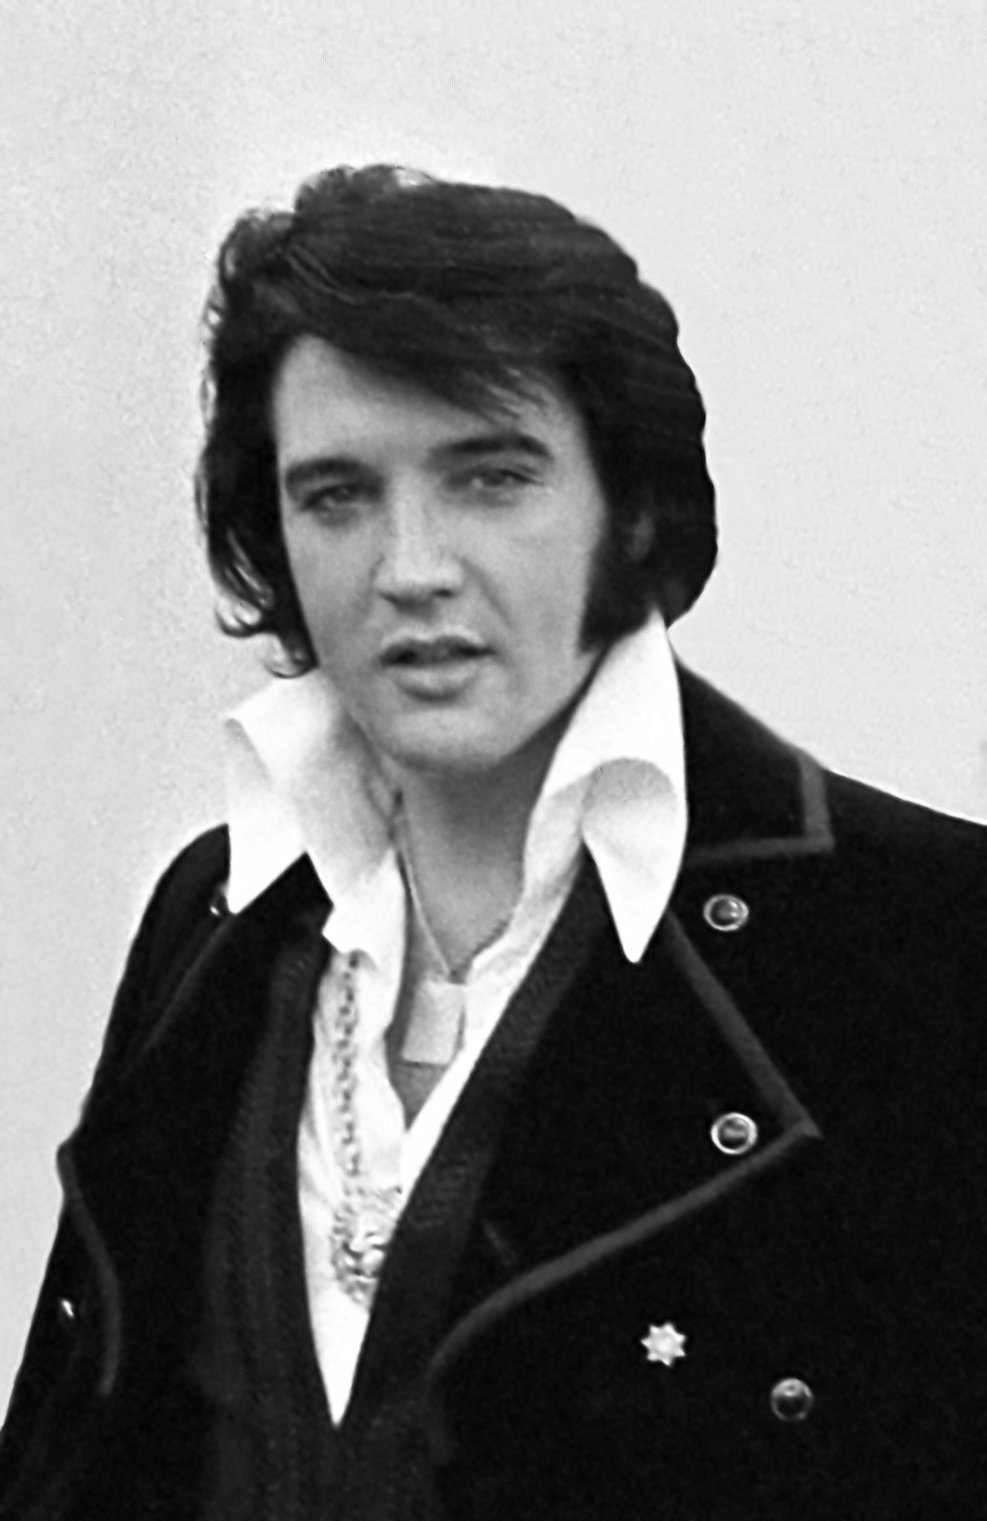 Elvis Presley at the White House on December 21, 1970. | Source: Wikimedia Commons, Public Domain